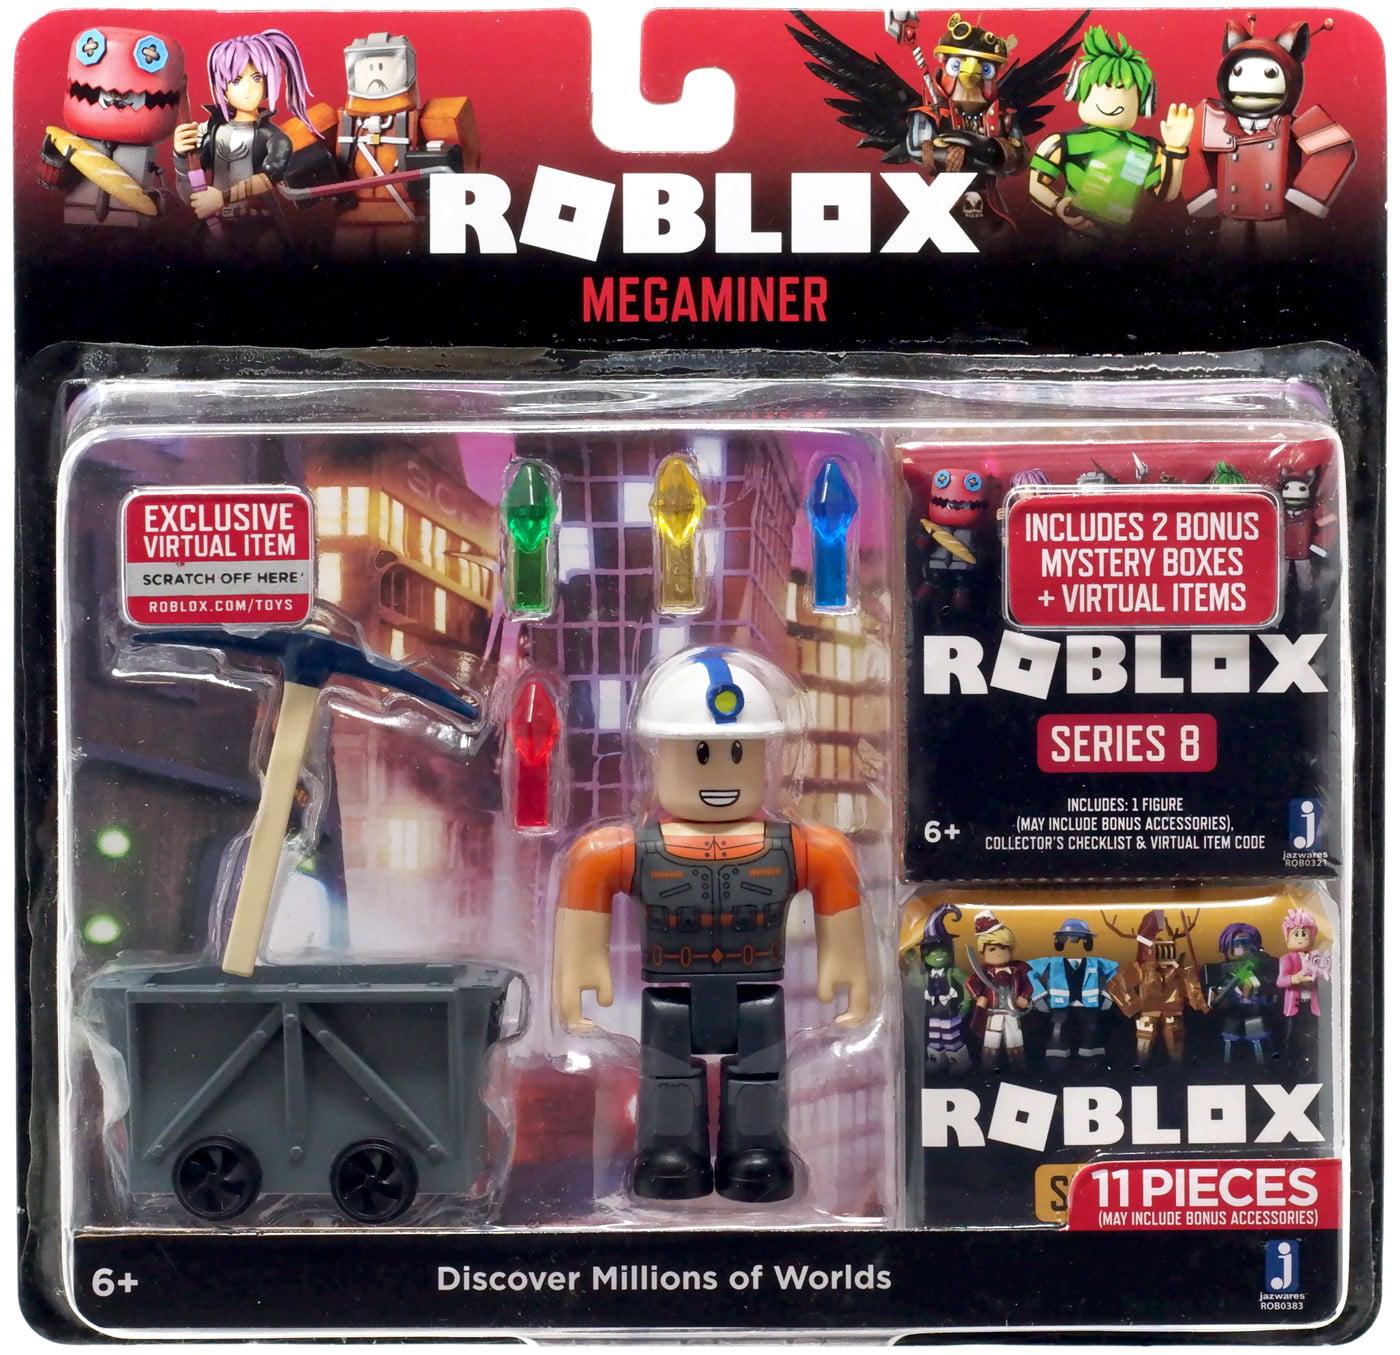 Roblox Megaminer Action Figure Includes 2 Mystery Packs Walmart Com Walmart Com - mega miner roblox